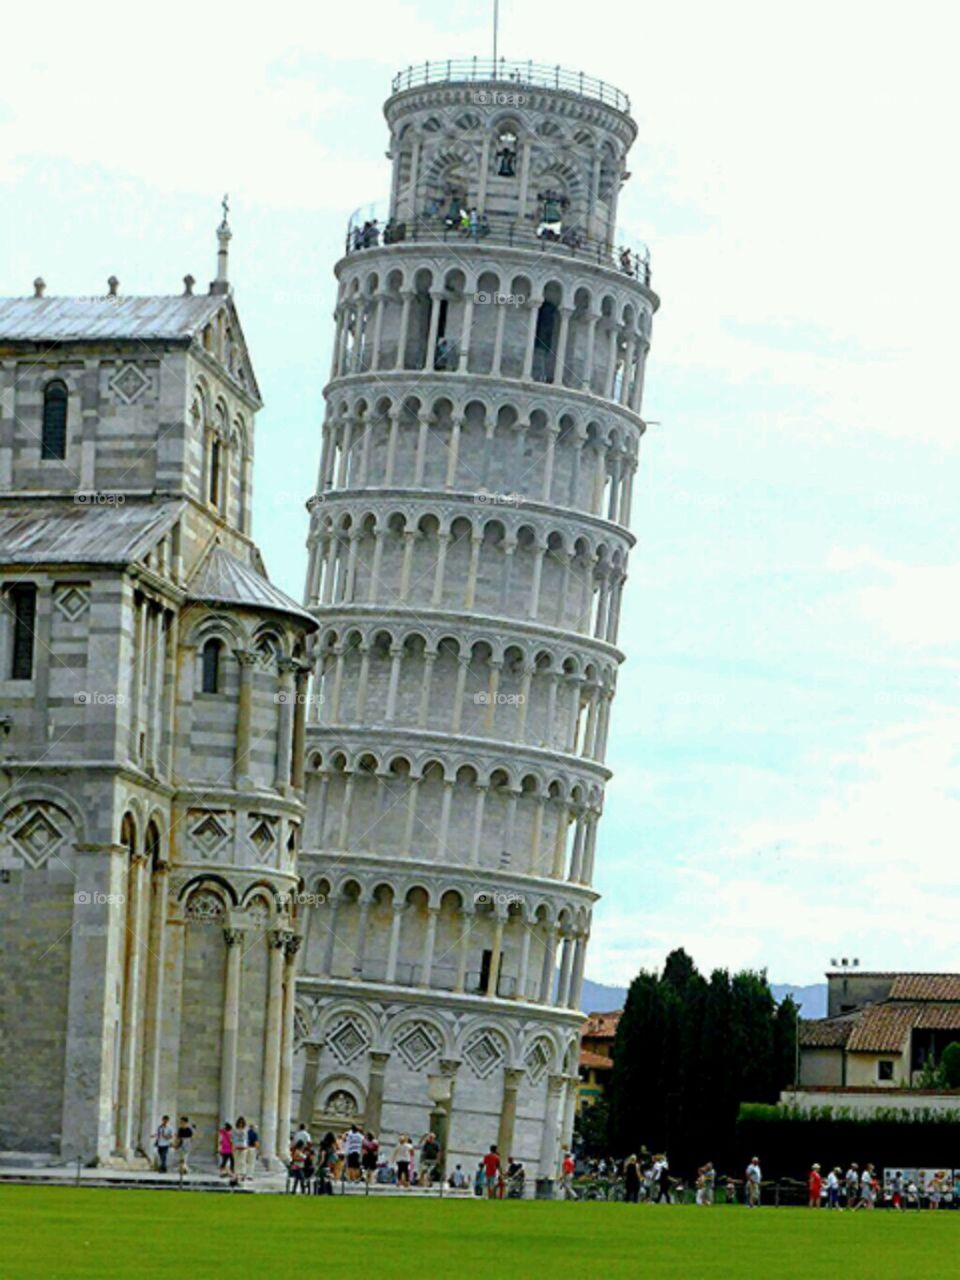 Tower of Piza